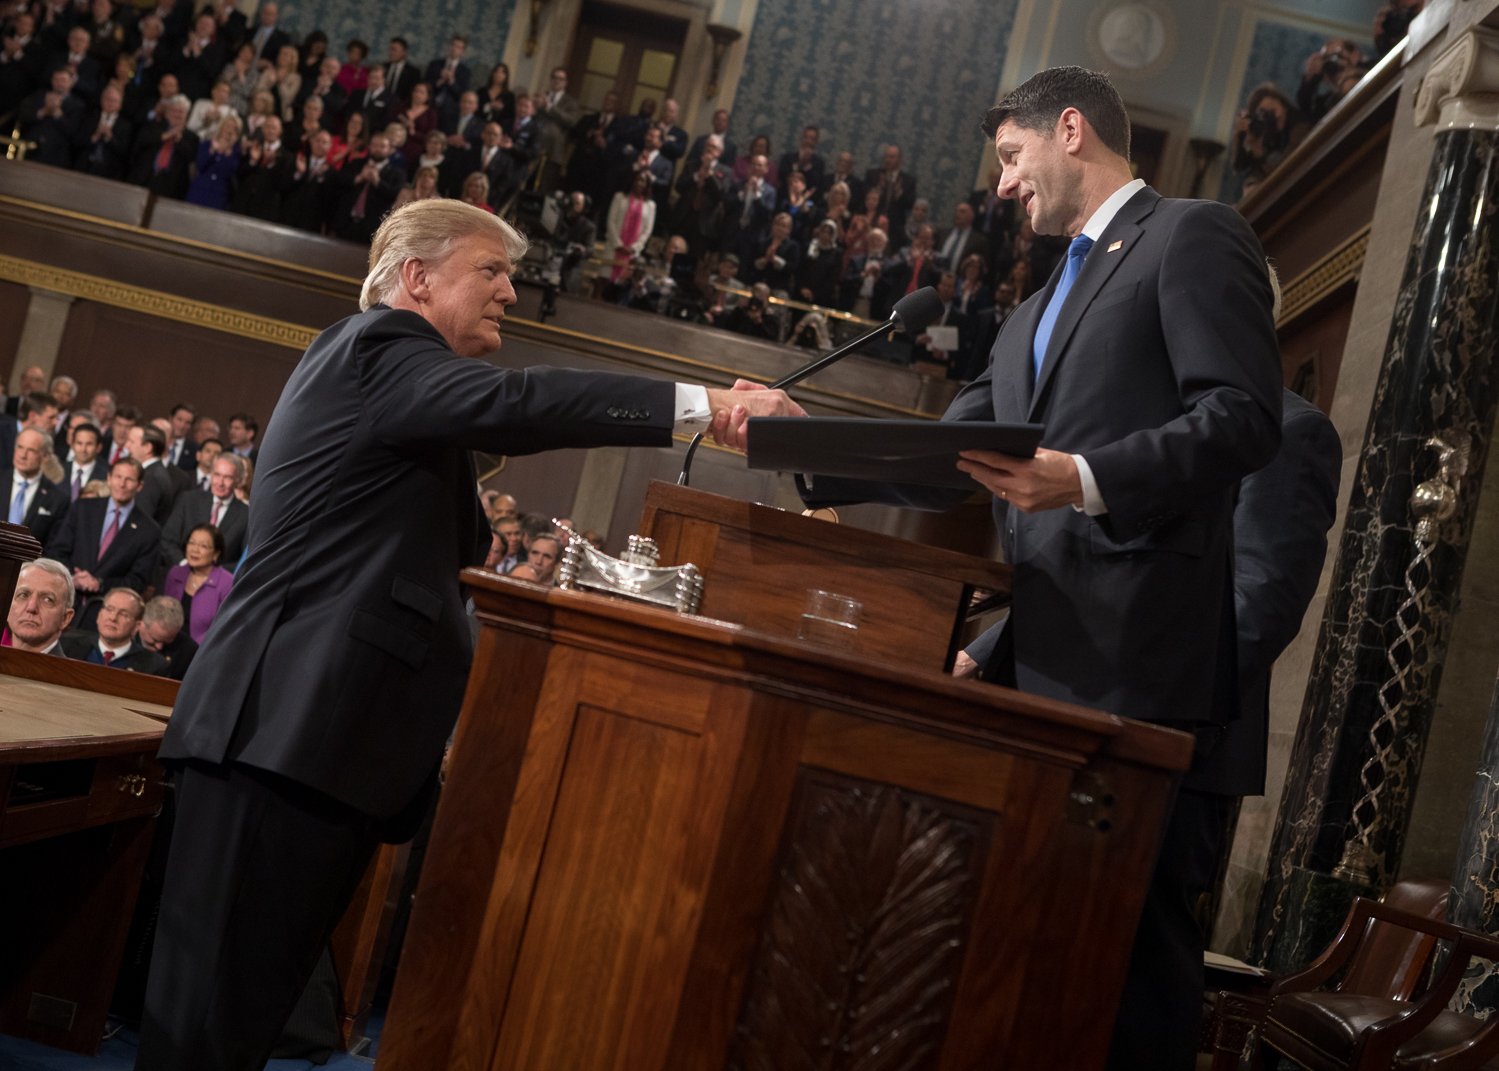 An image shows Paul Ryan standing behind a podium, reaching across the podium to shake hands with Donald Trump.